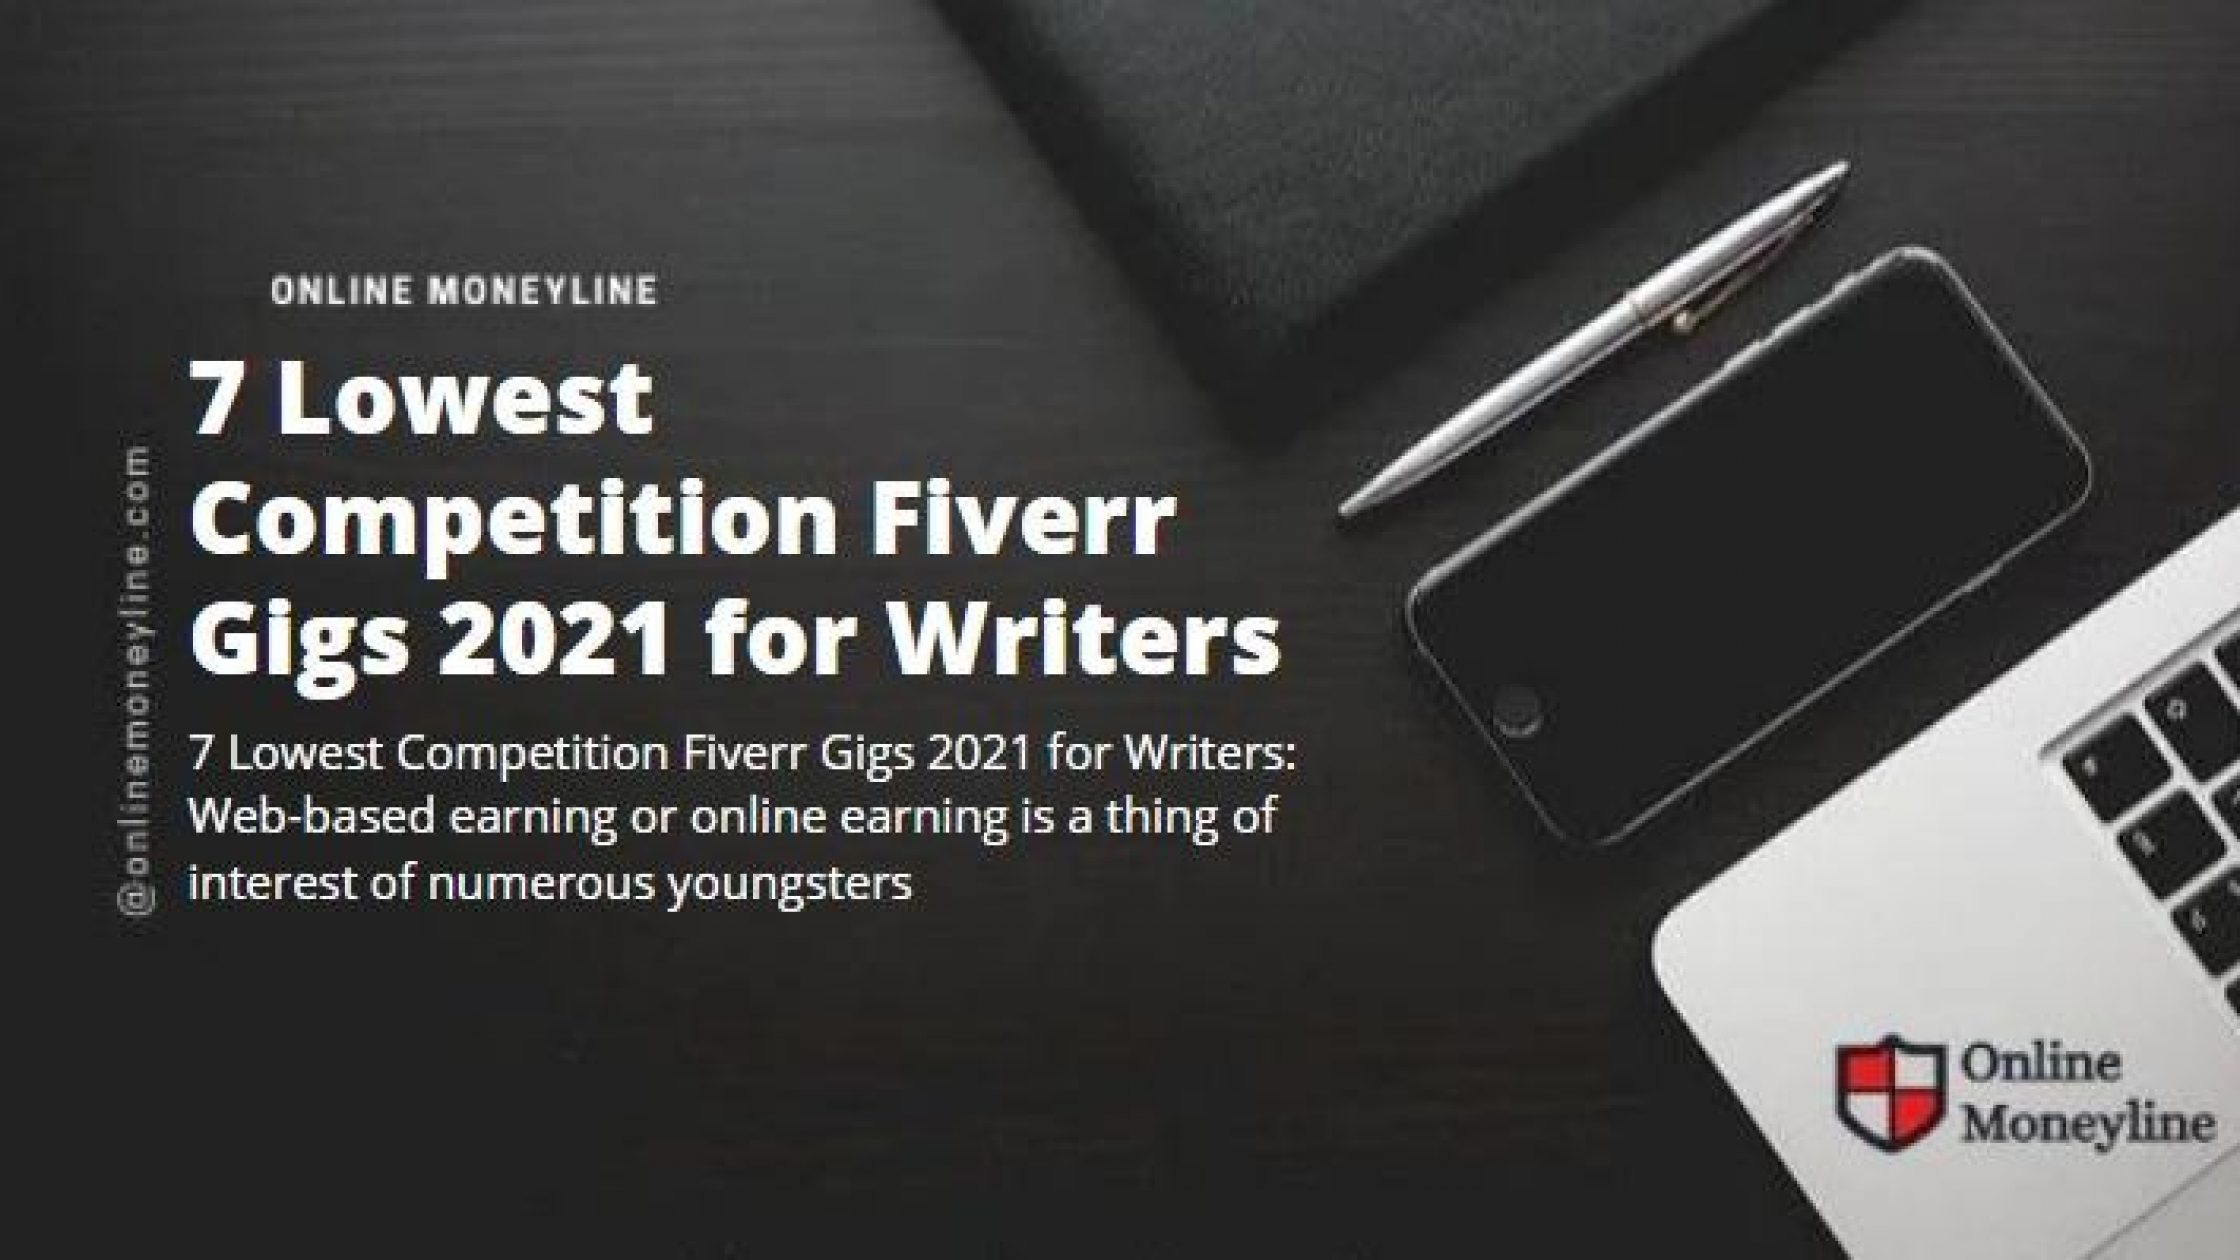 7 Lowest Competition Fiverr Gigs for Writers